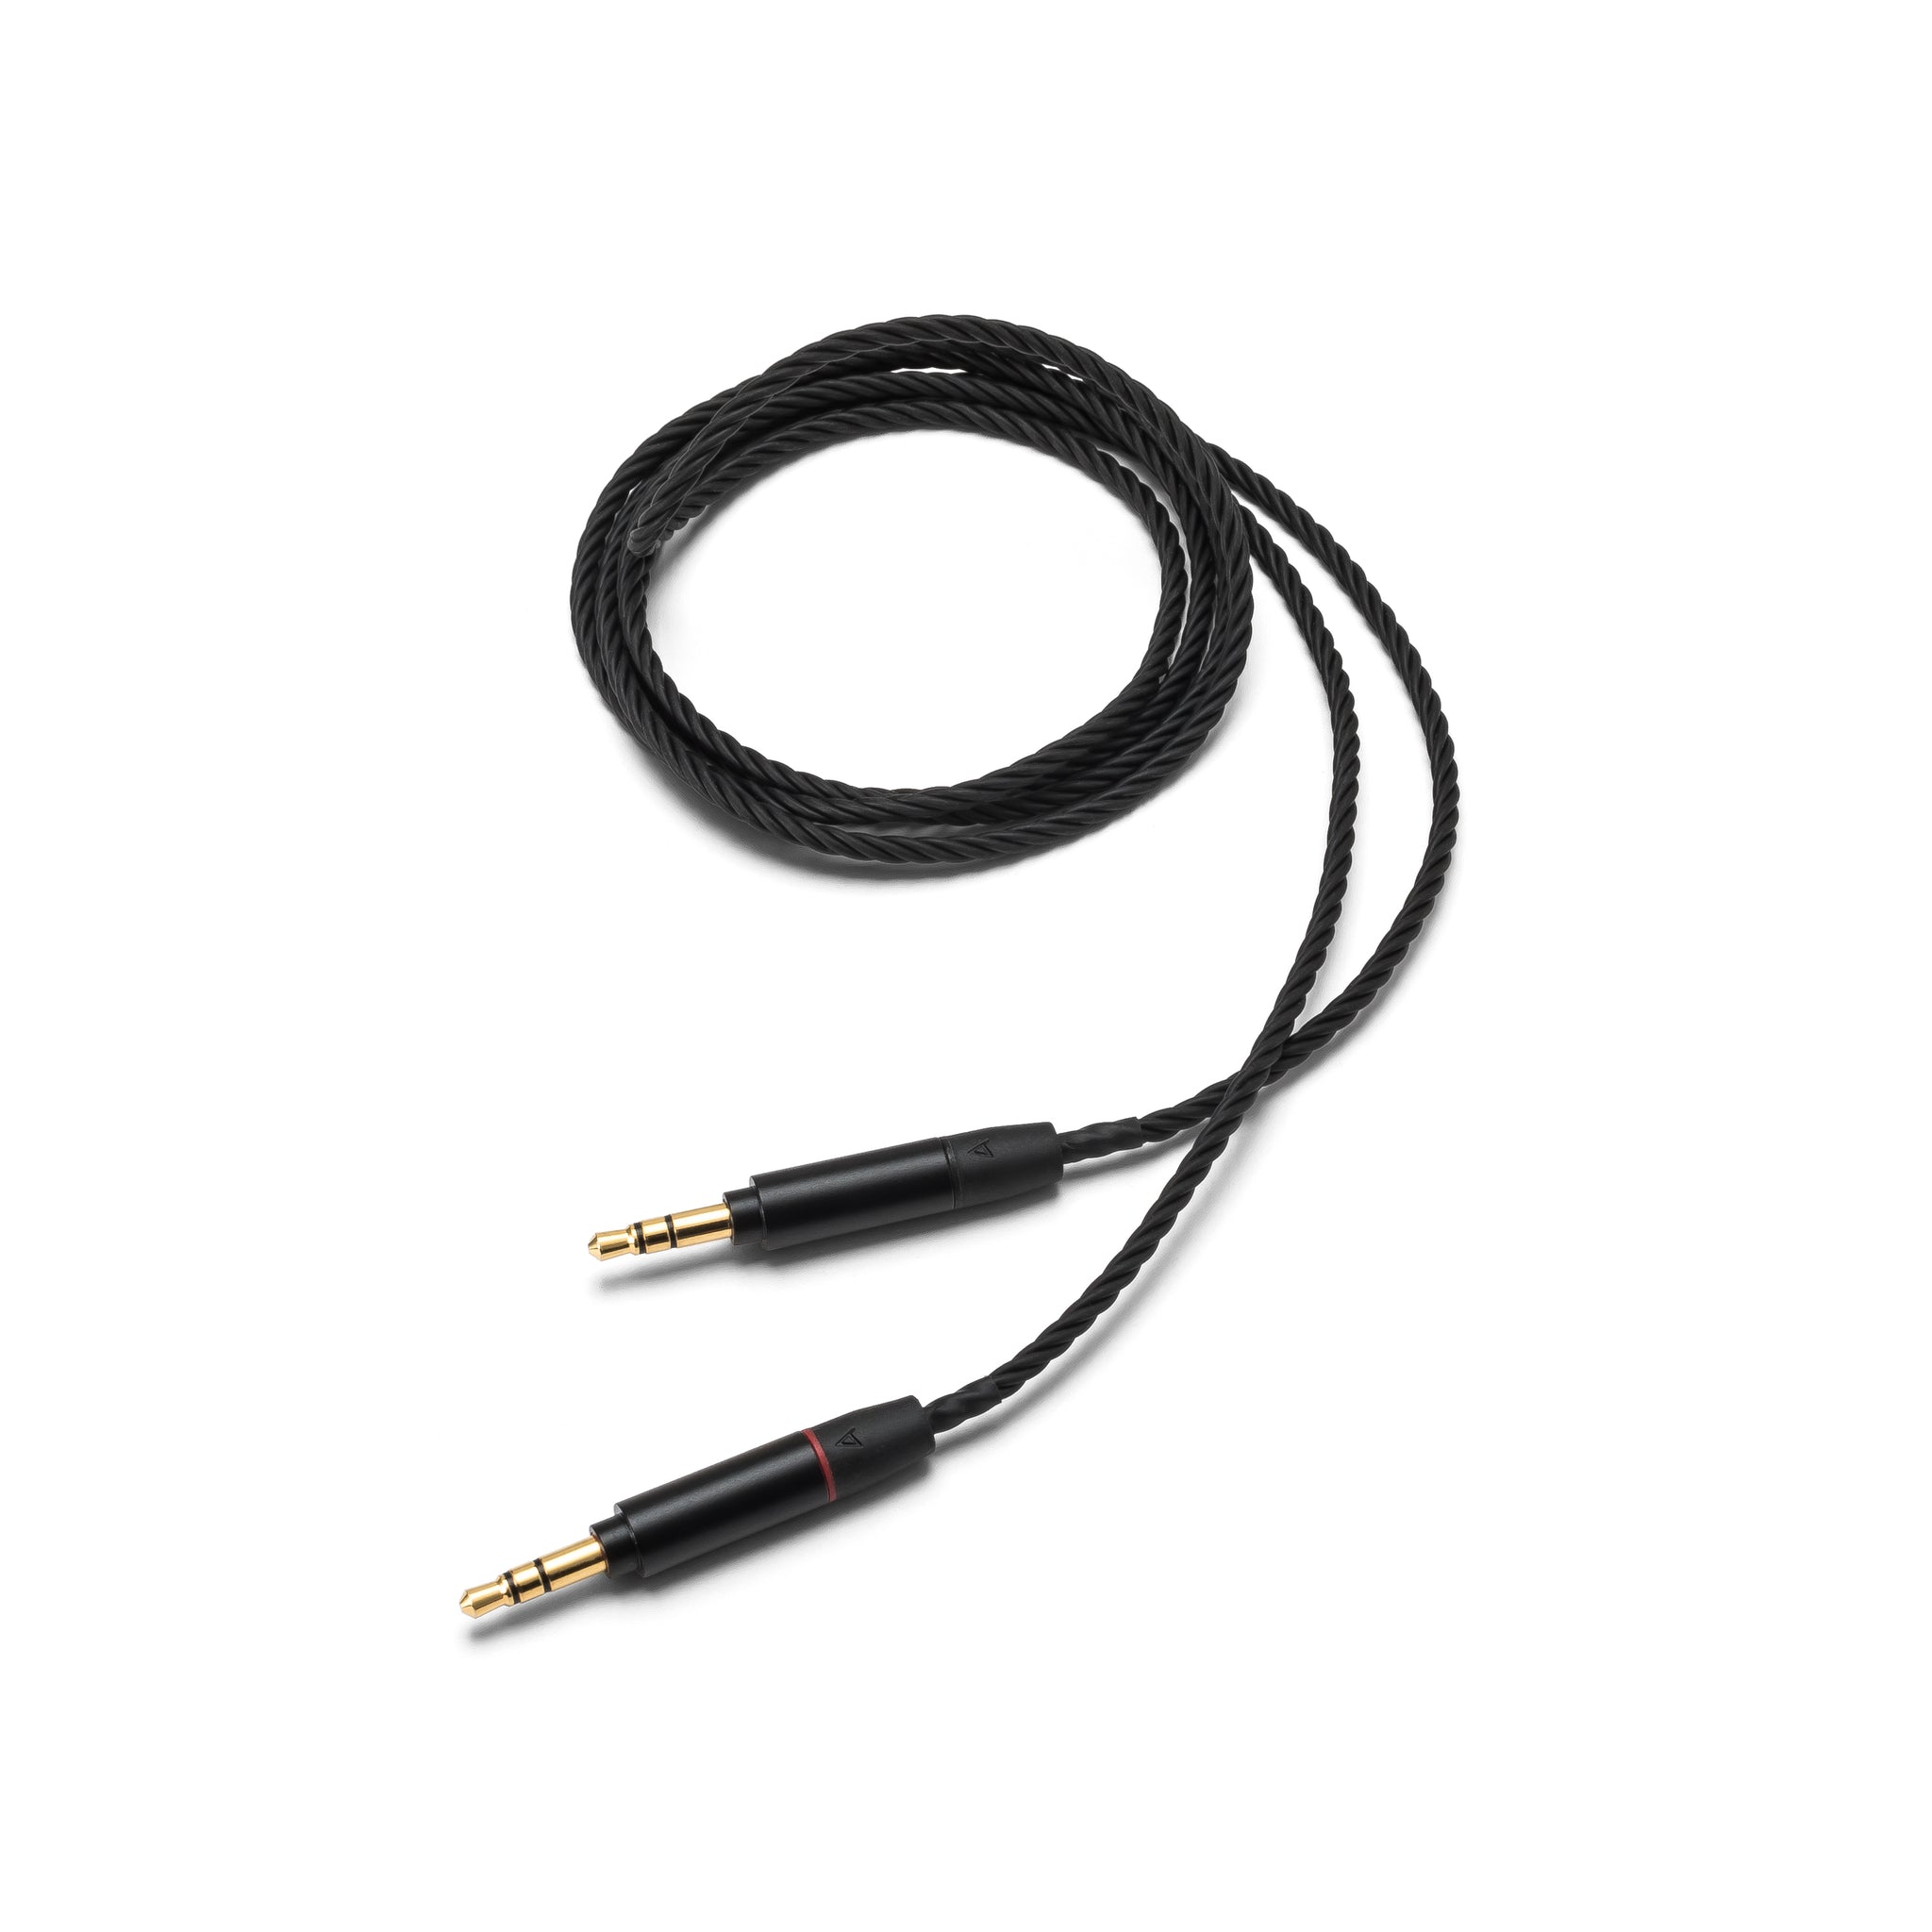 Twee graden component Demon Play Astell&Kern Hi-Fi Stereo AUX Cable – Astell&Kern US Online Shop